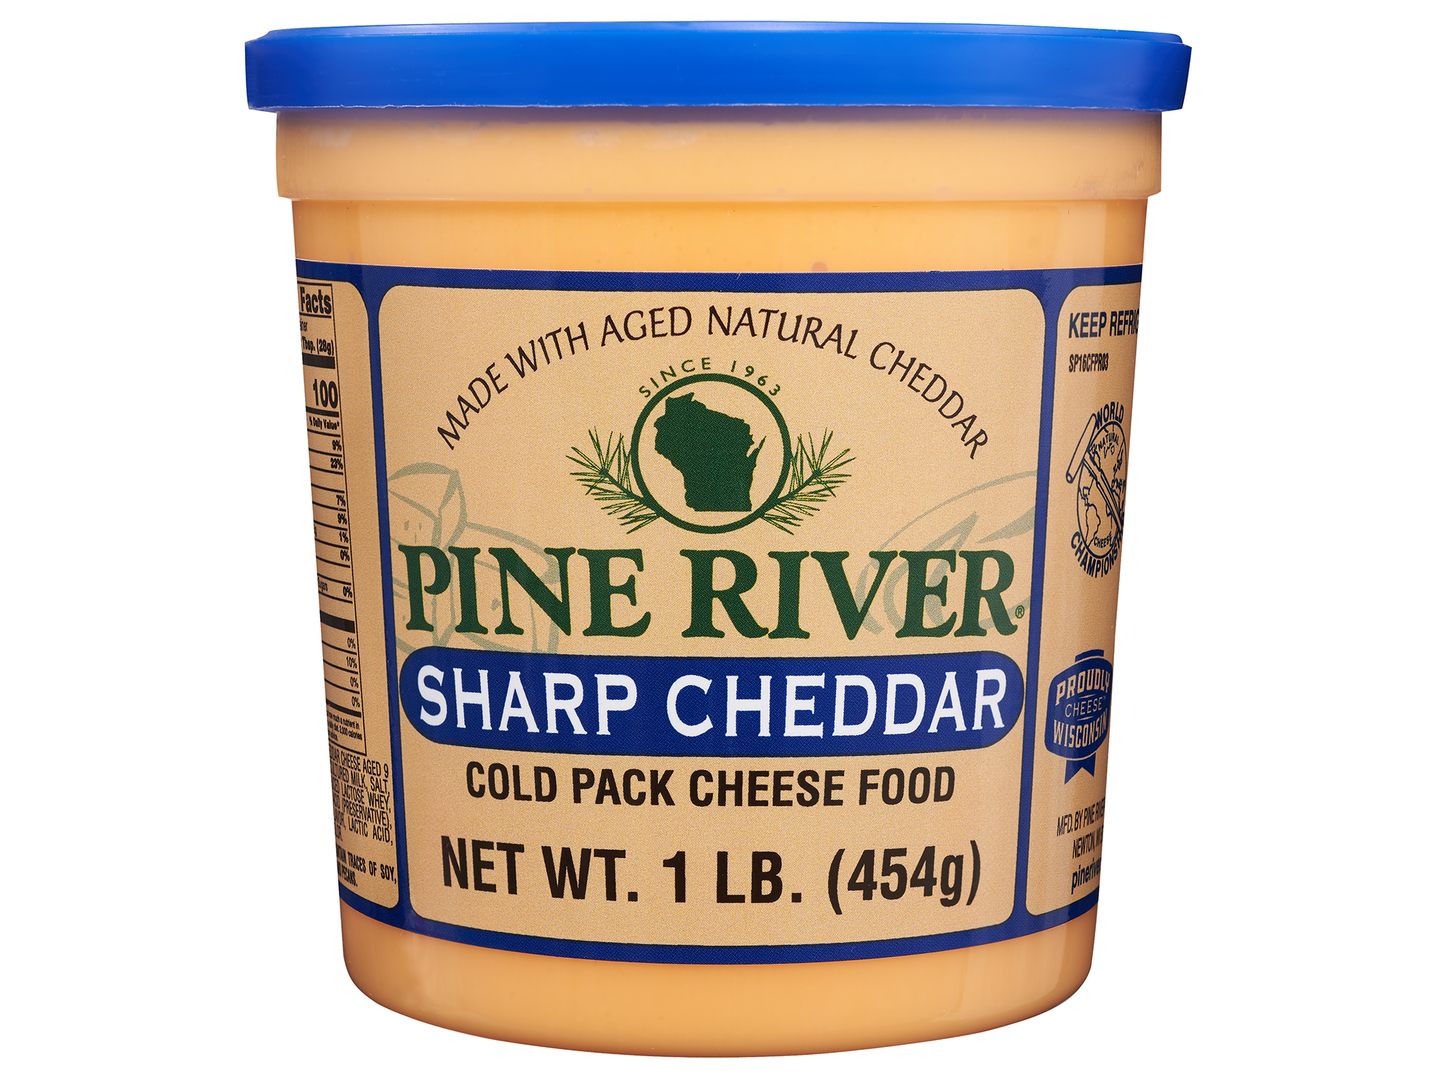 Sharp Cheddar Cold Pack Cheese Spread